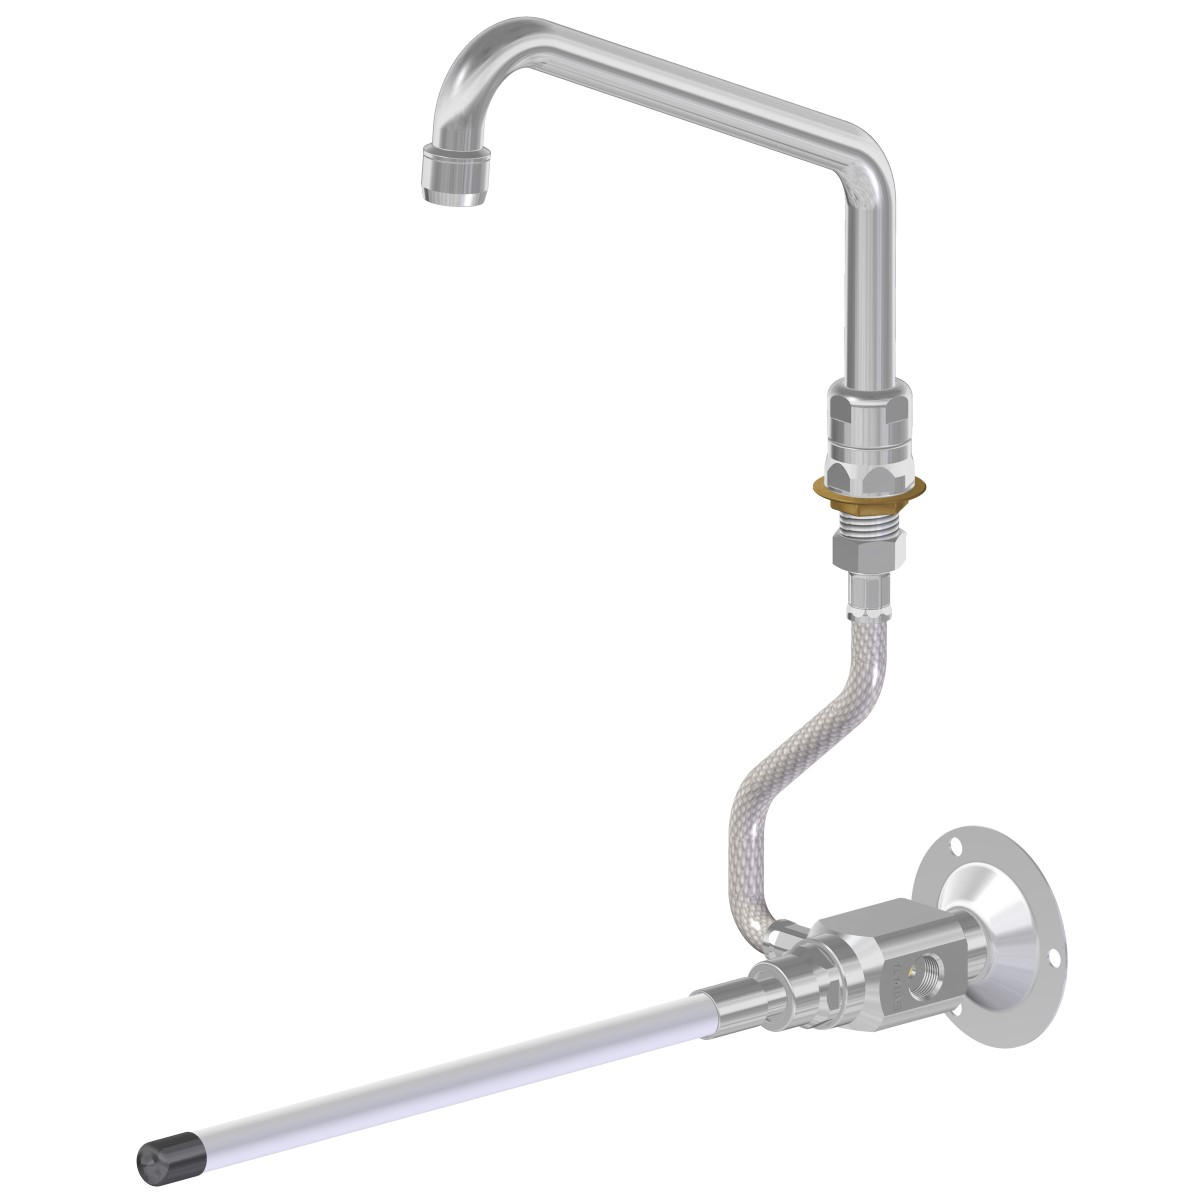 Knee operated tap with rotating spout